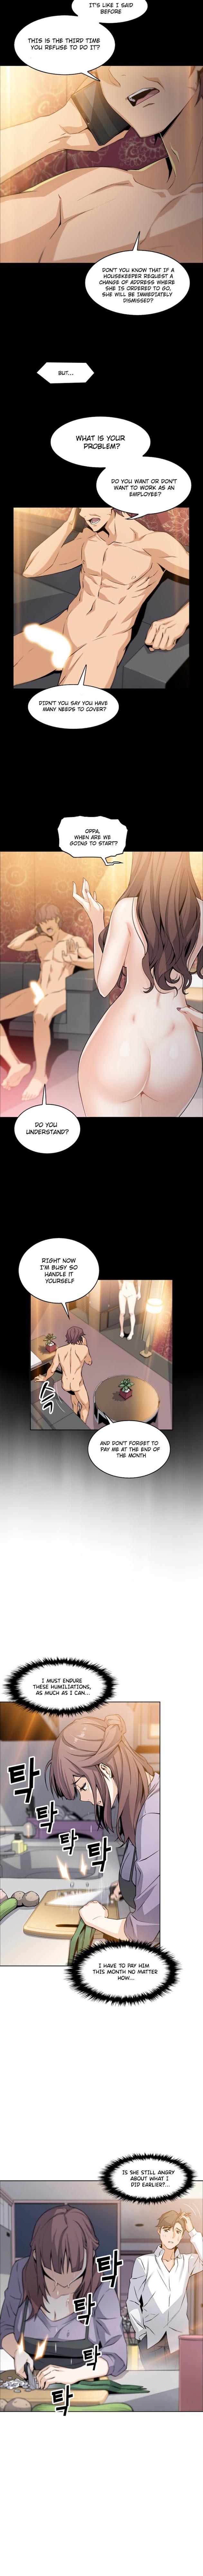 Housekeeper [Neck Pillow, Paper] Ch.49/49 [English] [Manhwa PDF] Completed 96